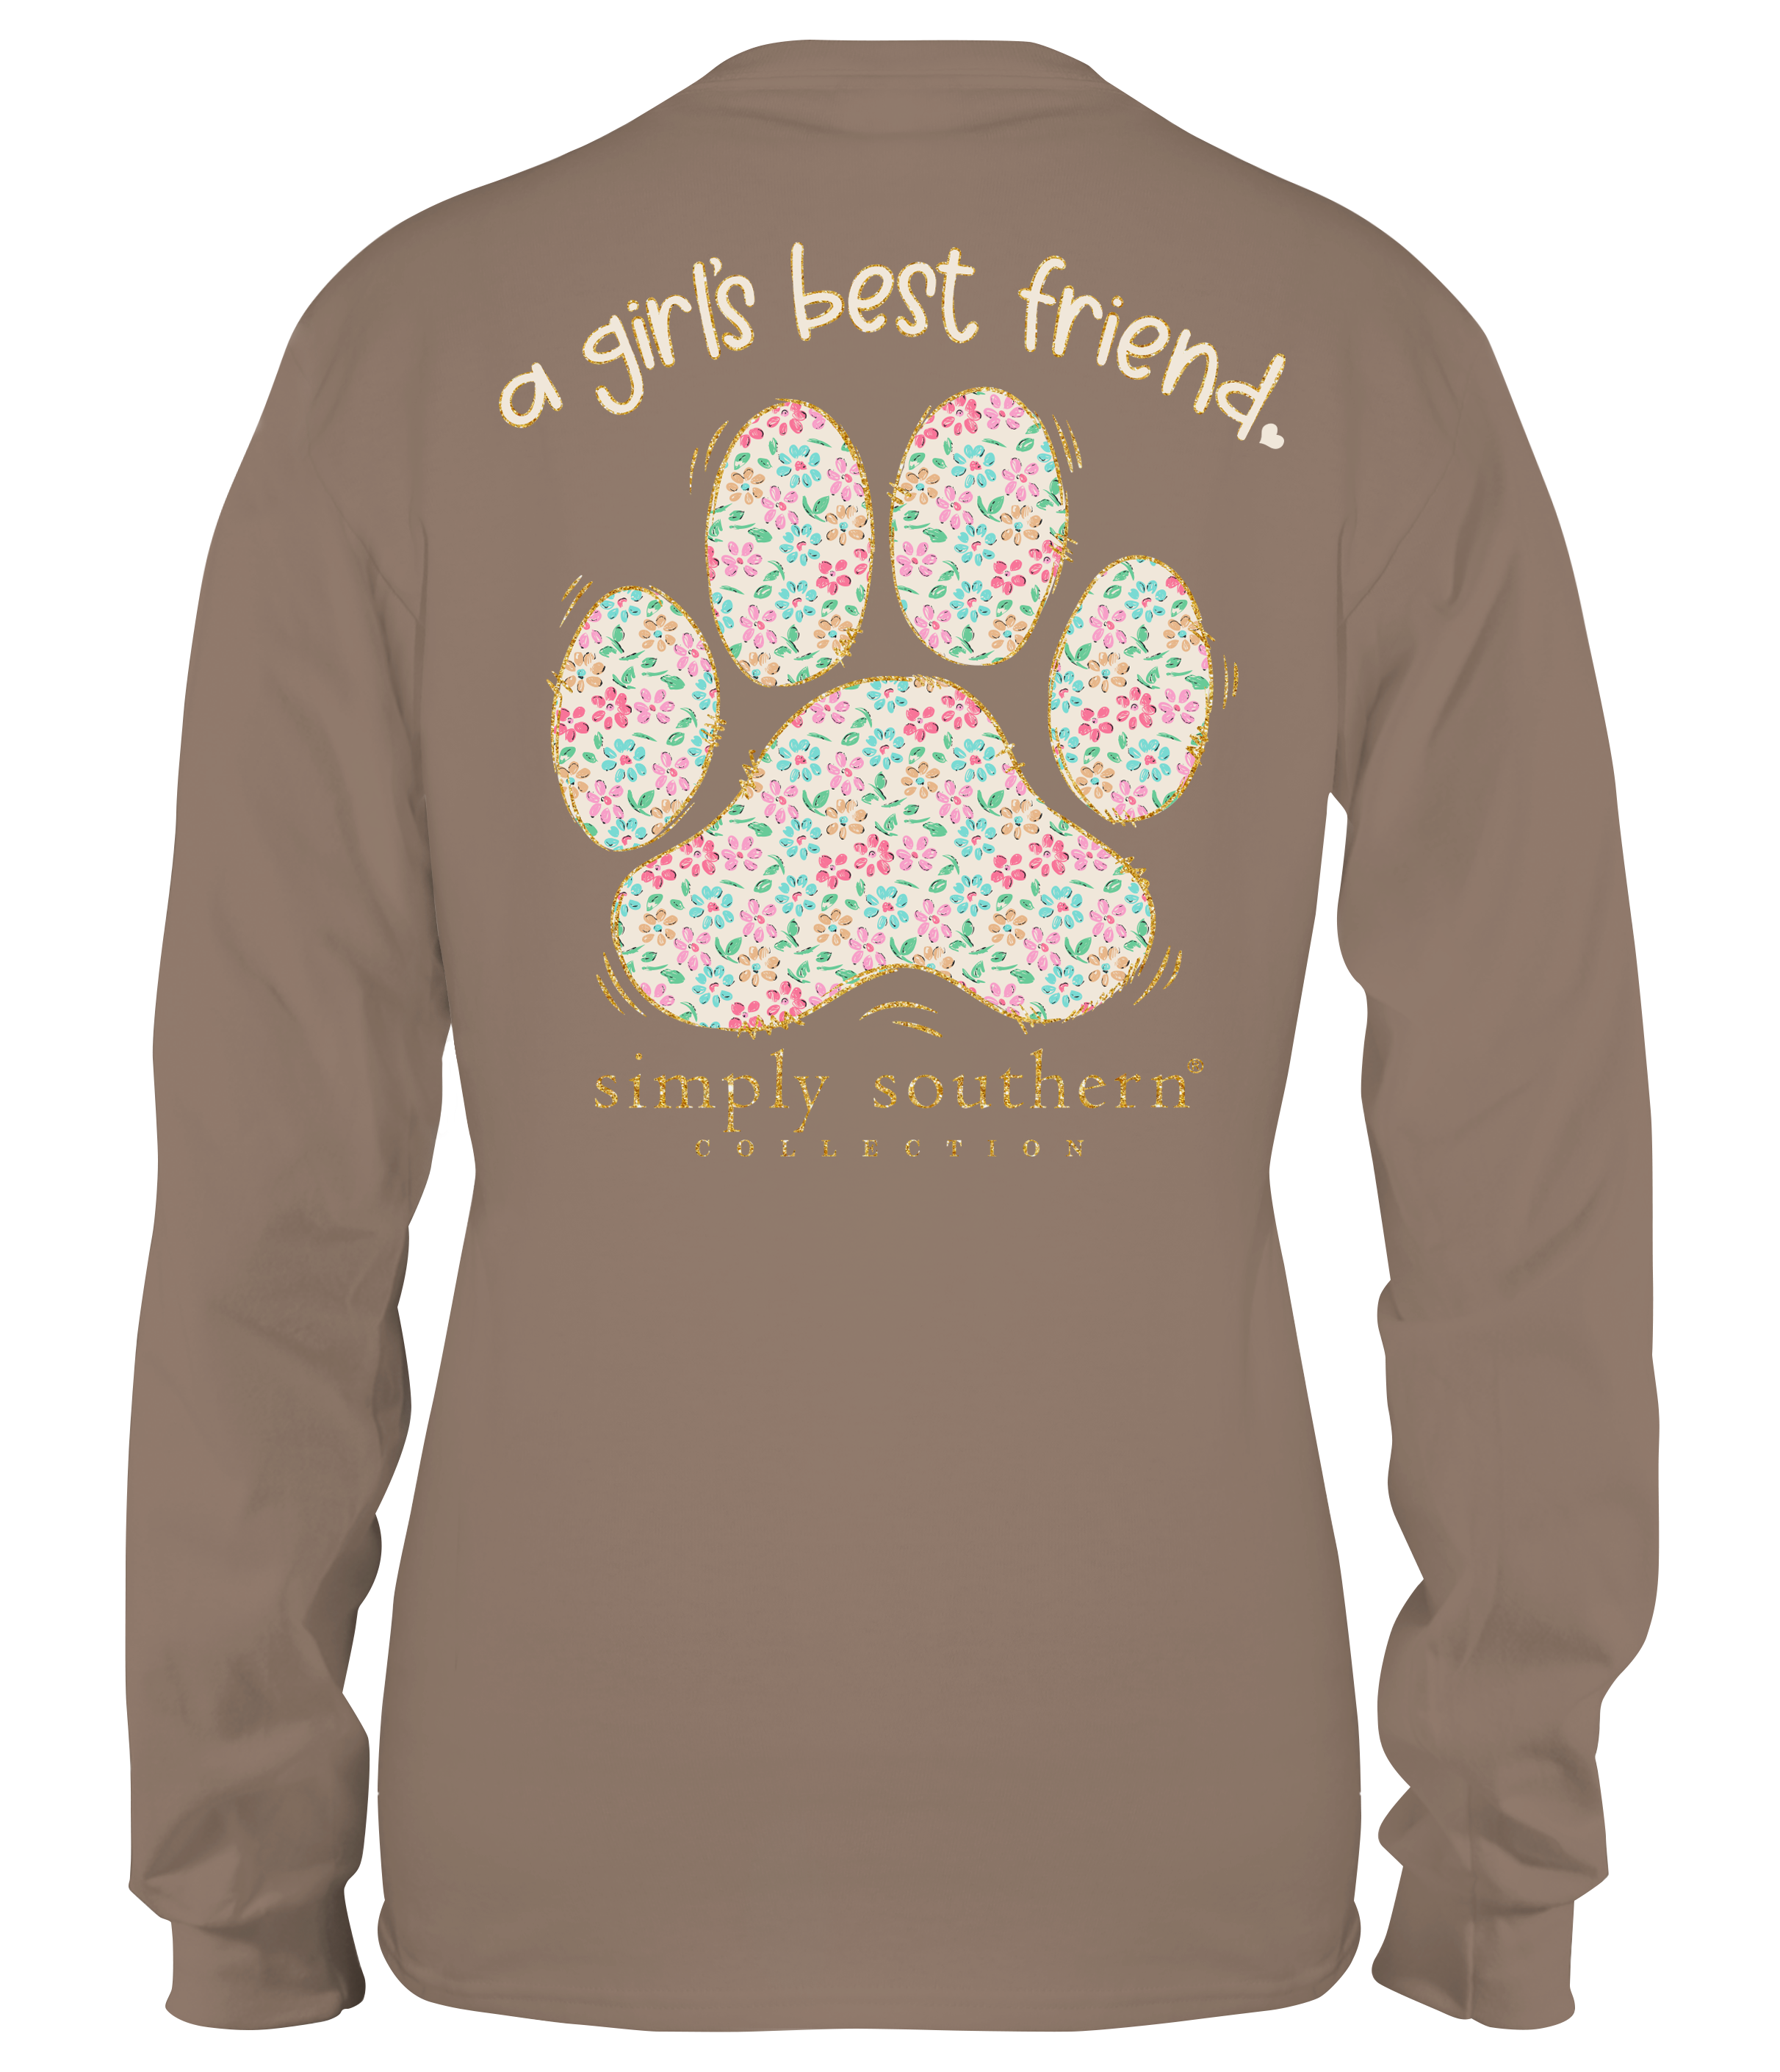 'Girl's Best Friend' Pawprint Long Sleeve Tee by Simply Southern